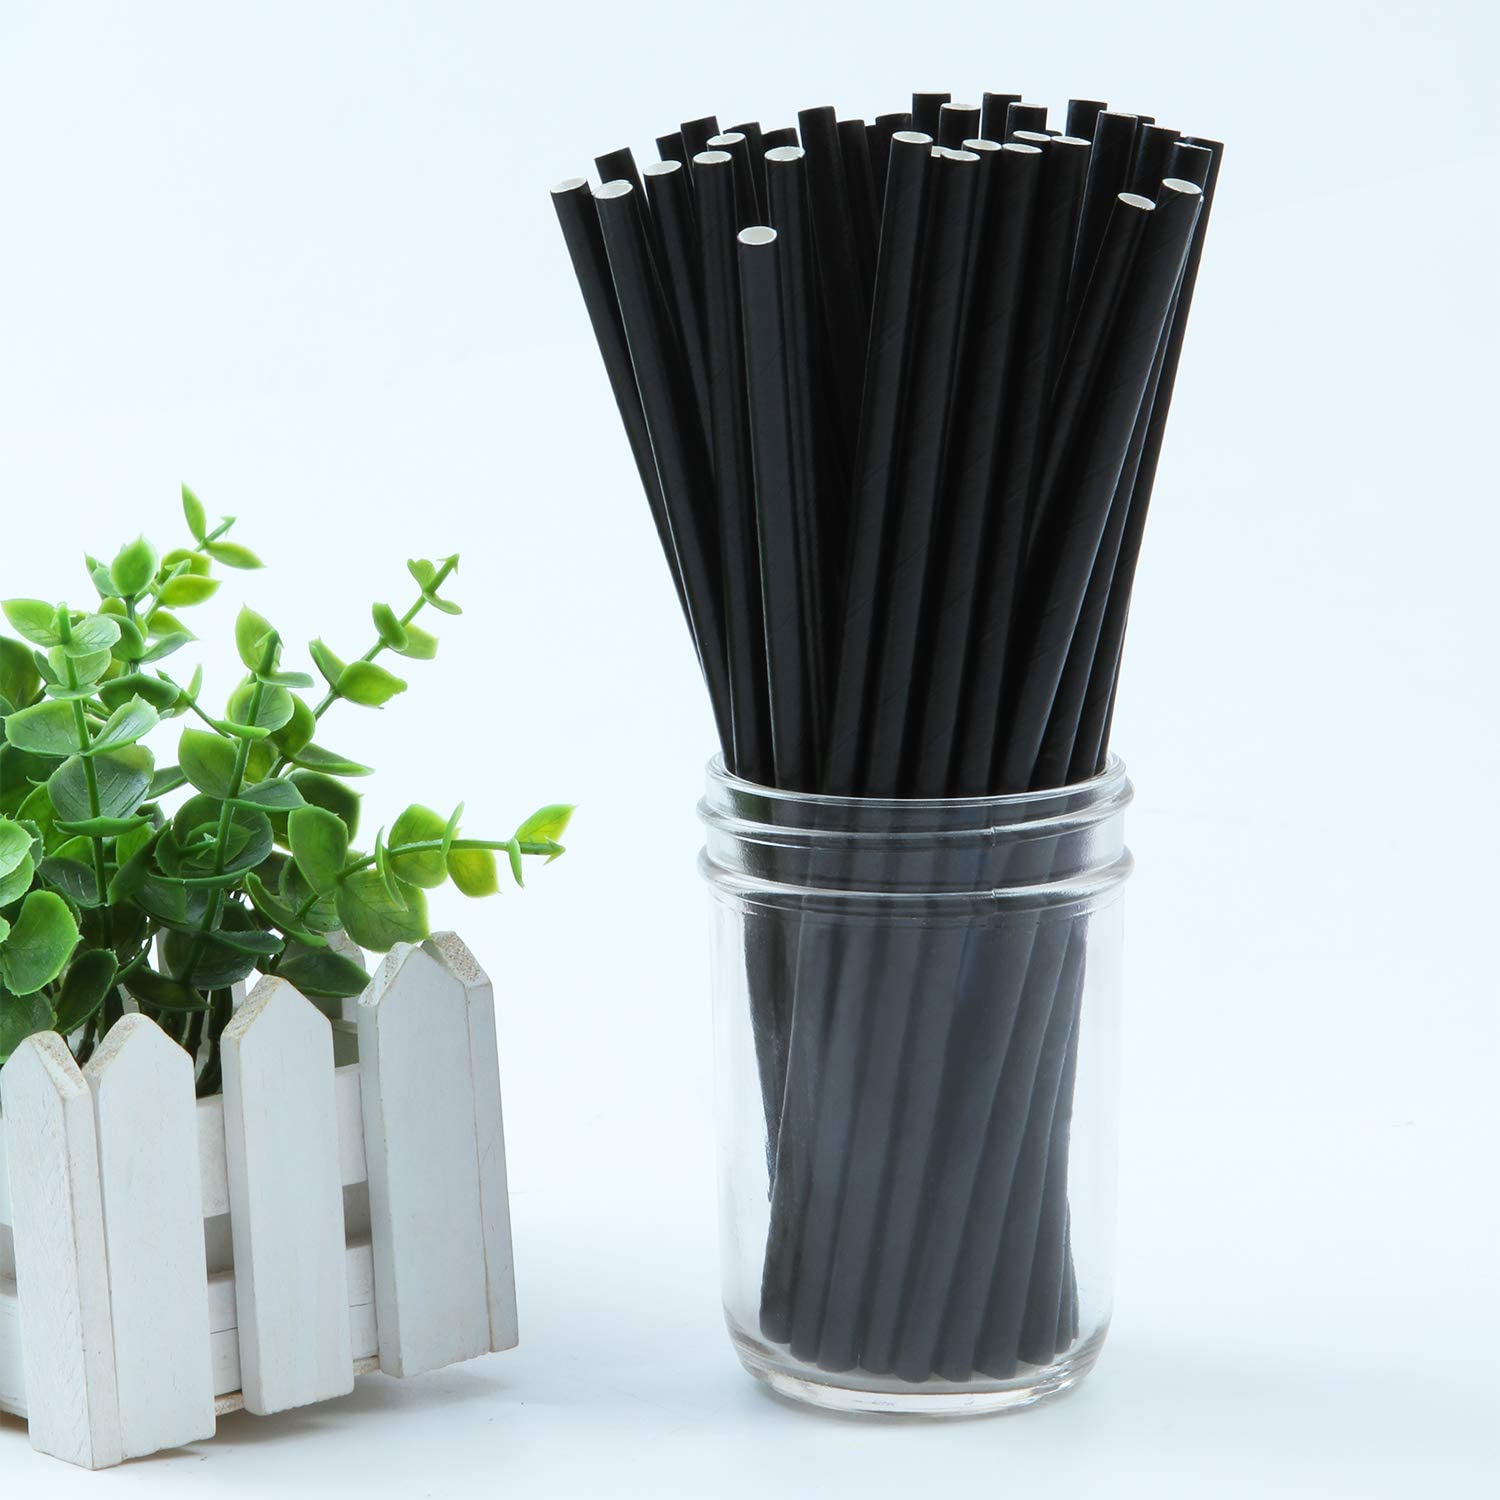 Black Solid Paper Eco Straws - Normal length 200mm/6mm - 250 straws pack